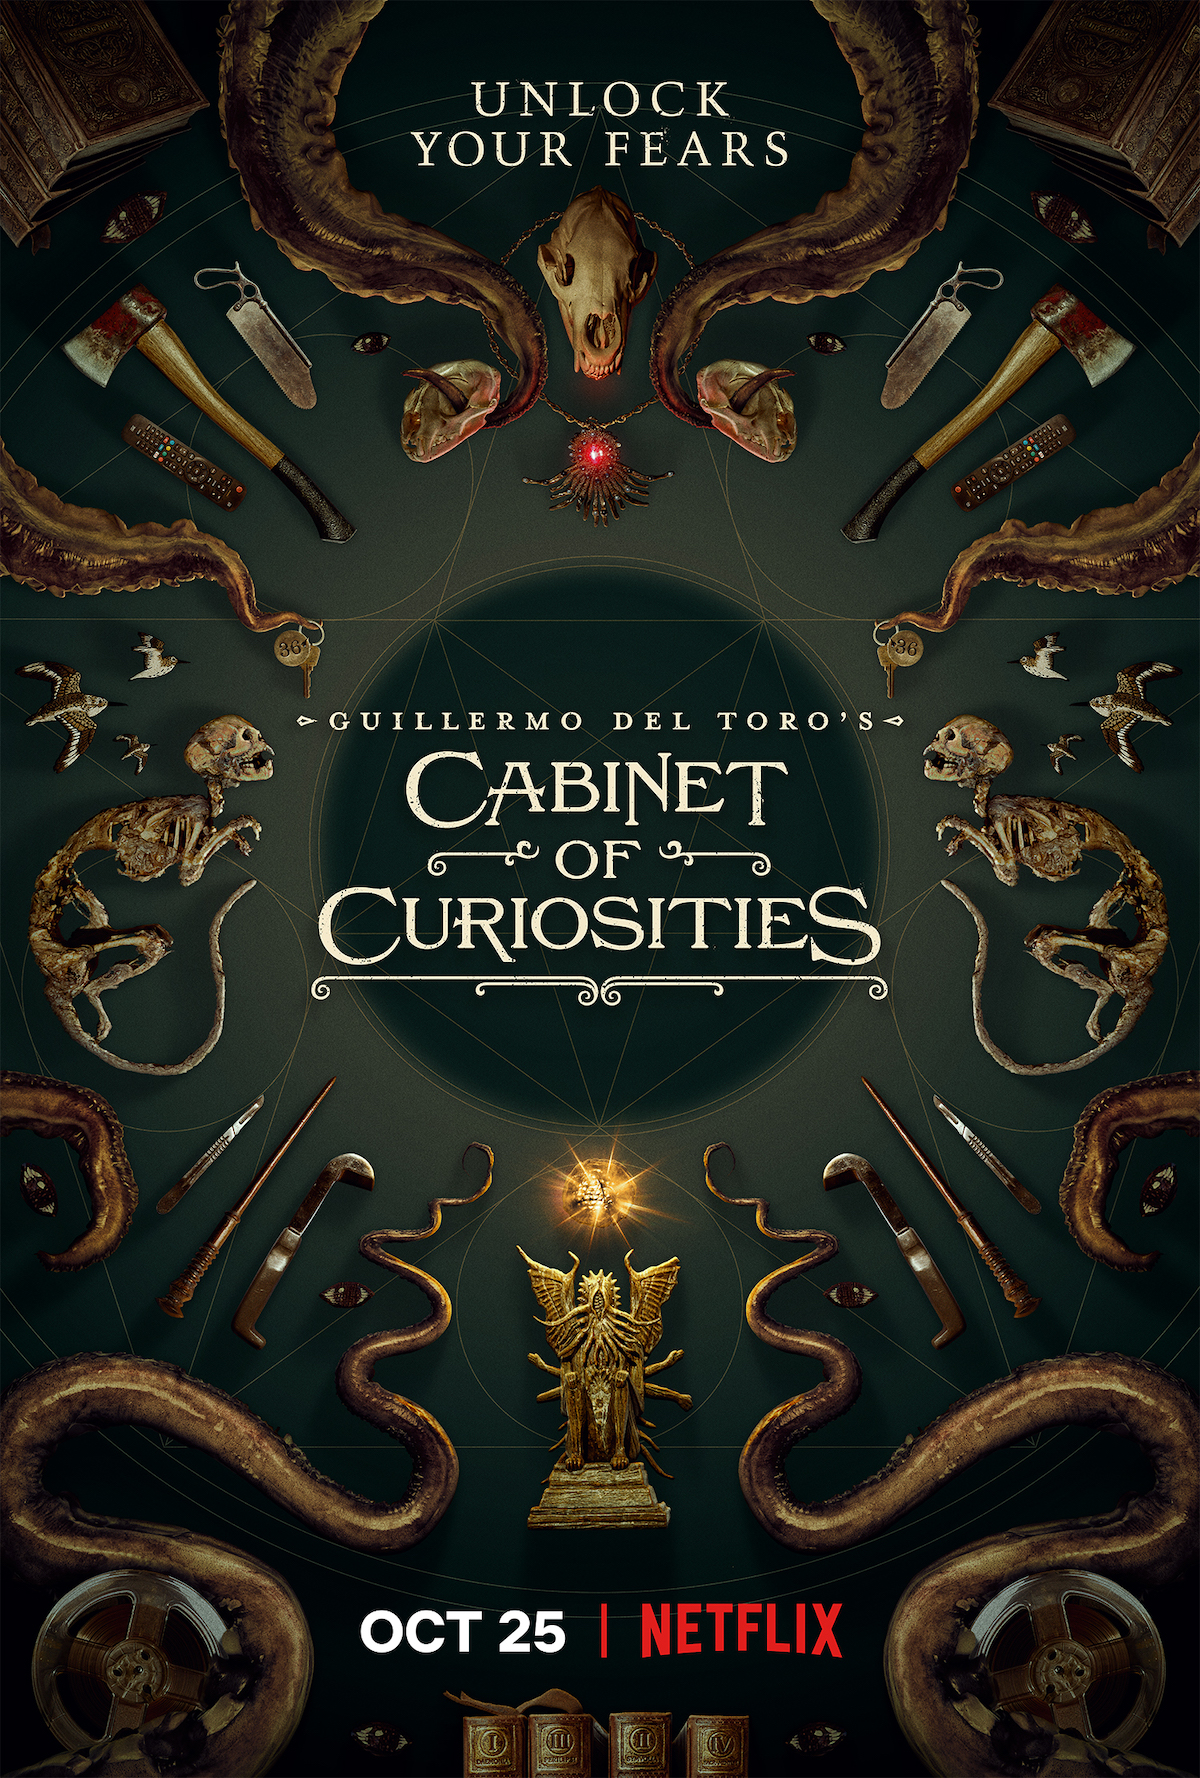 Guillermo Del Toro's Cabinet of Curiosities Key art and episodic images